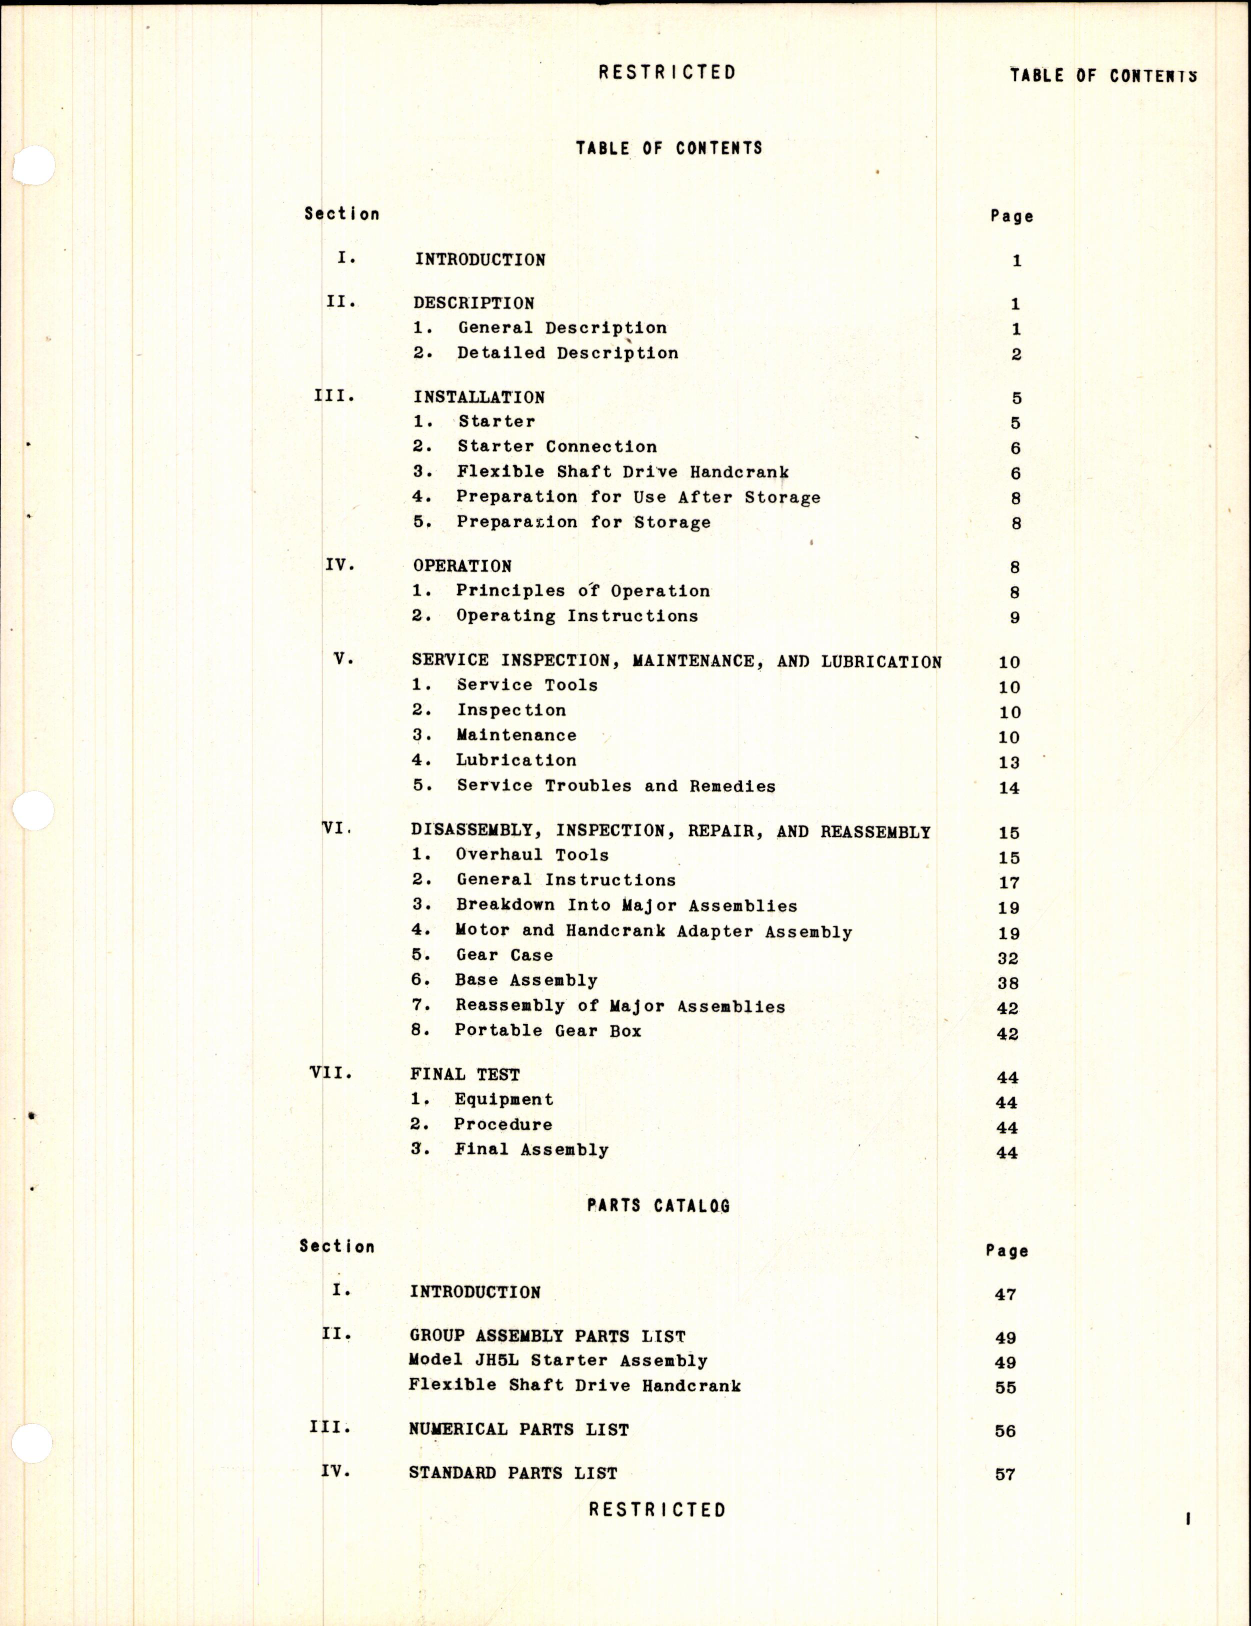 Sample page 5 from AirCorps Library document: Handbook of Instructions with Parts Catalog for Jahco Electric Starters Model JH5L